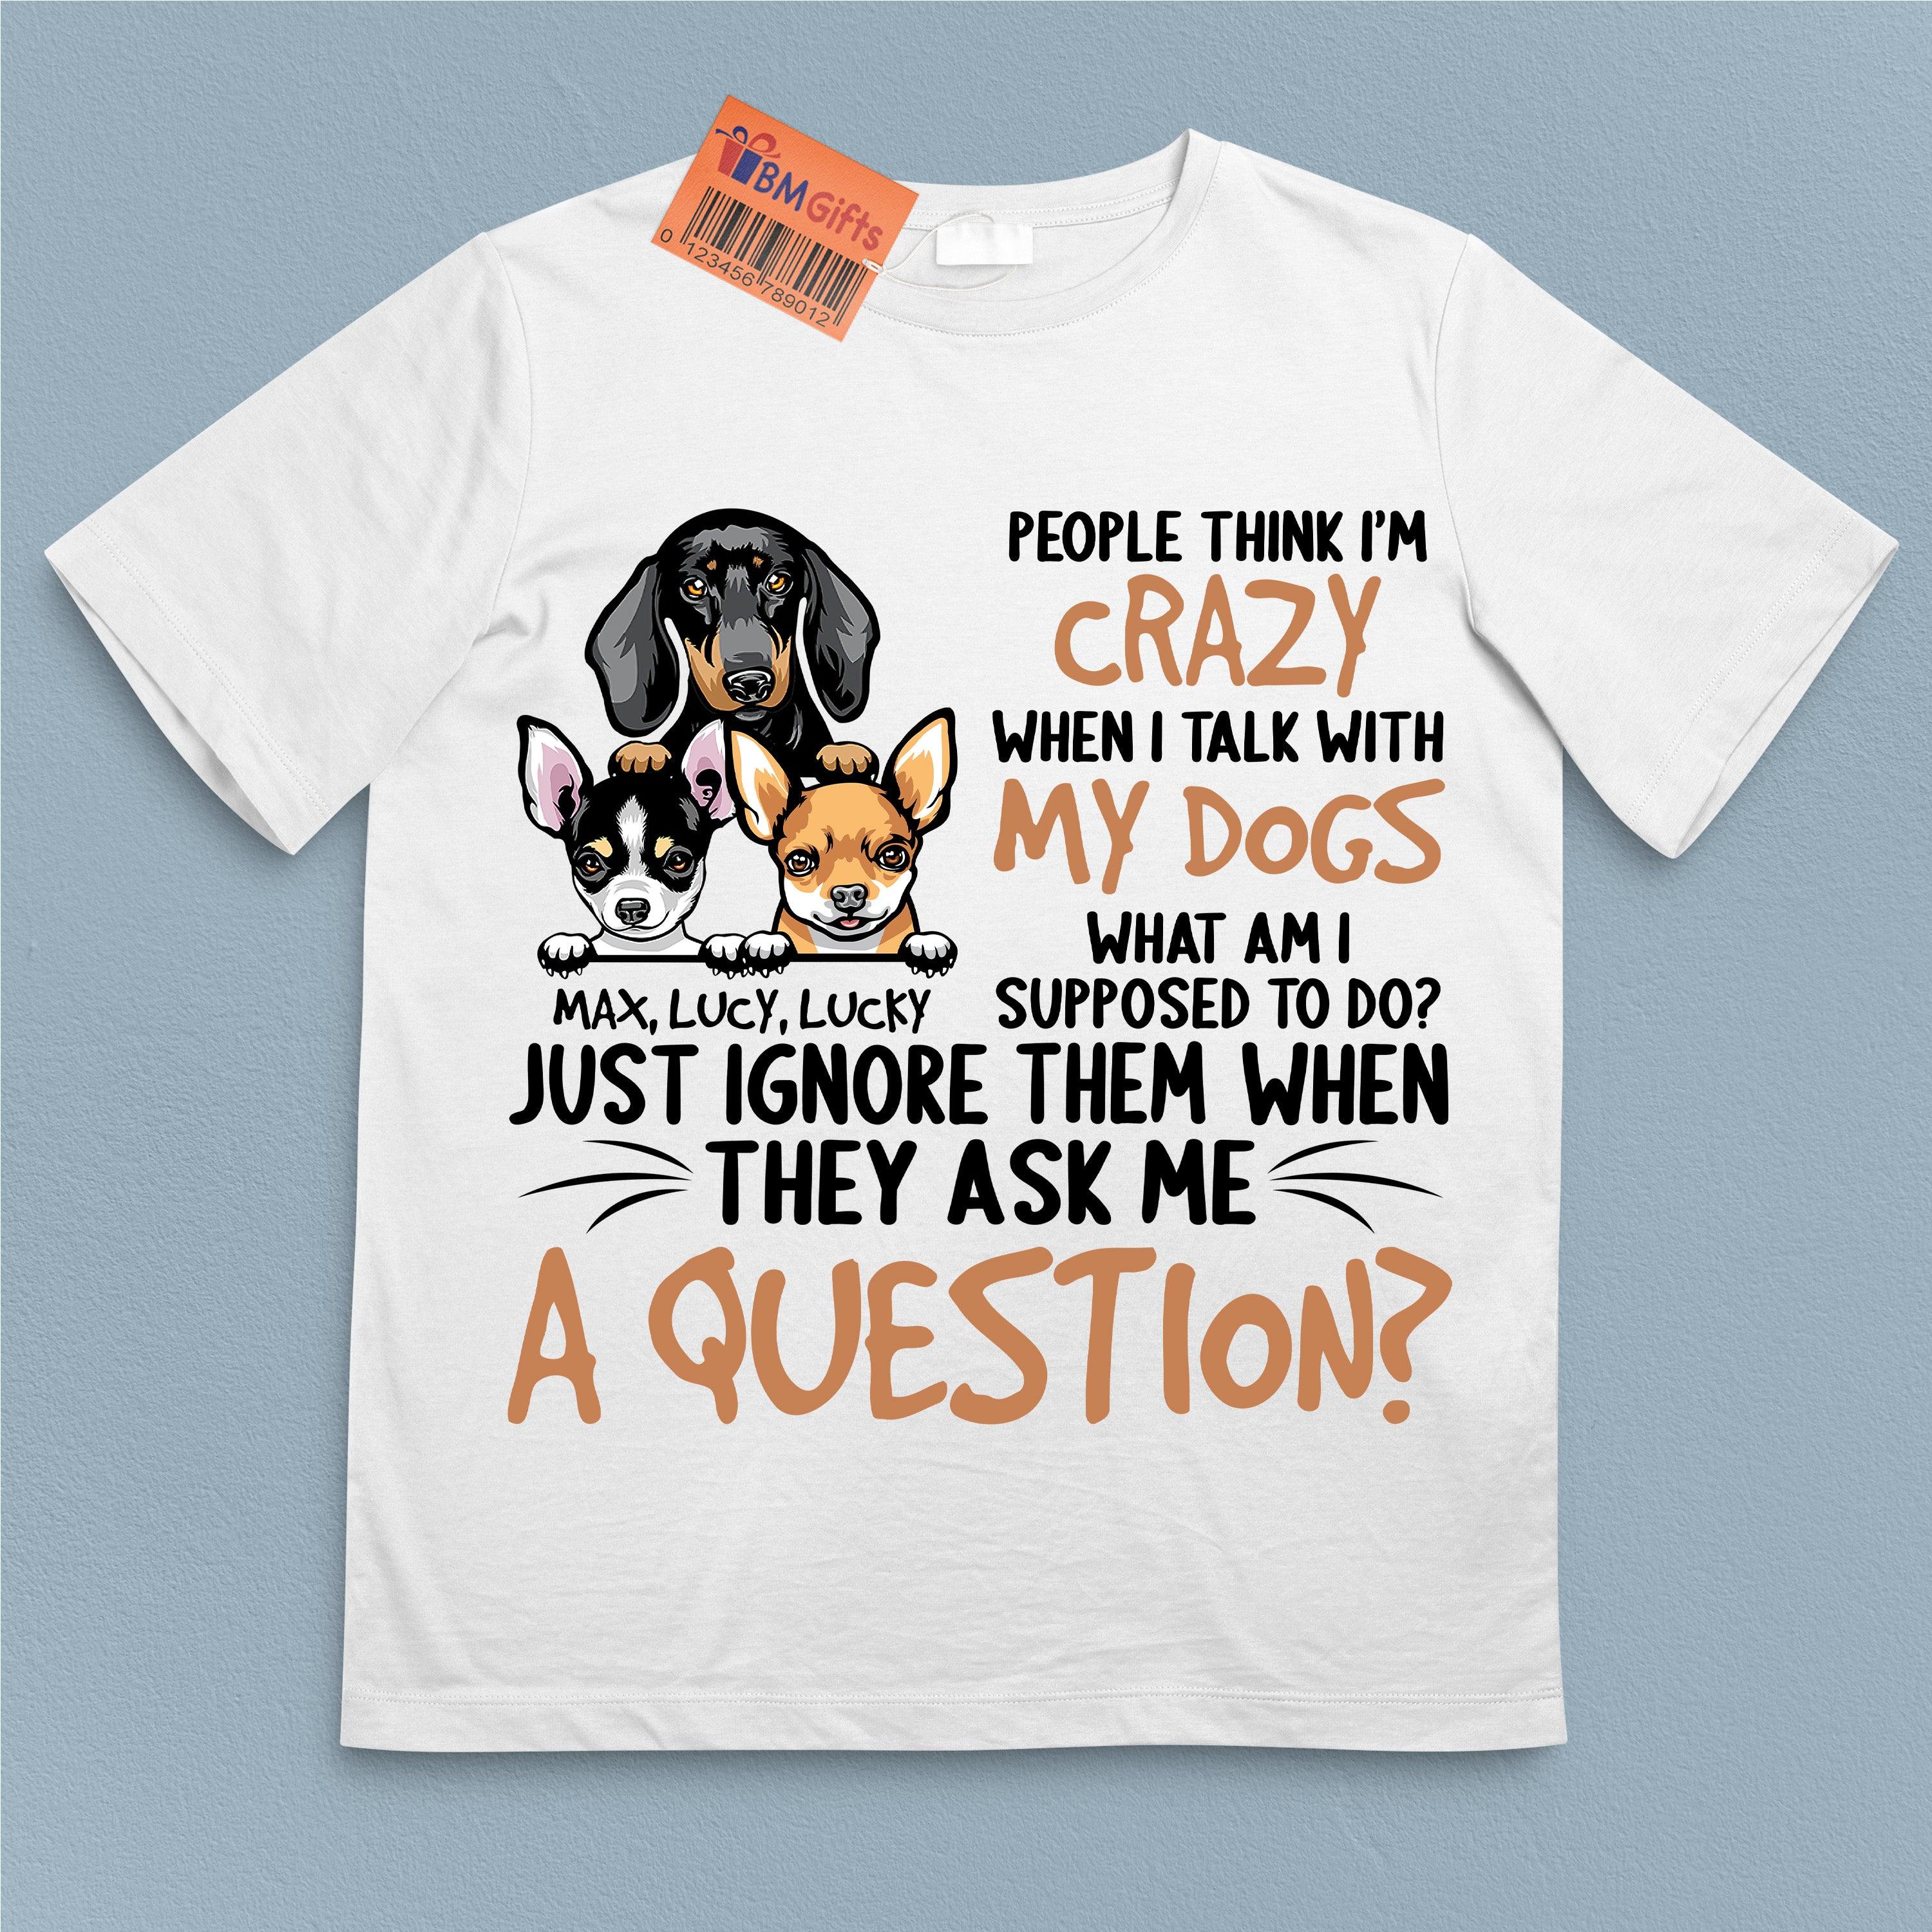 Talking With Dog Is Very Normal Personalized T-shirt, Personalized Gift for Dog Lovers, Dog Dad, Dog Mom - TS114PS06 - BMGifts